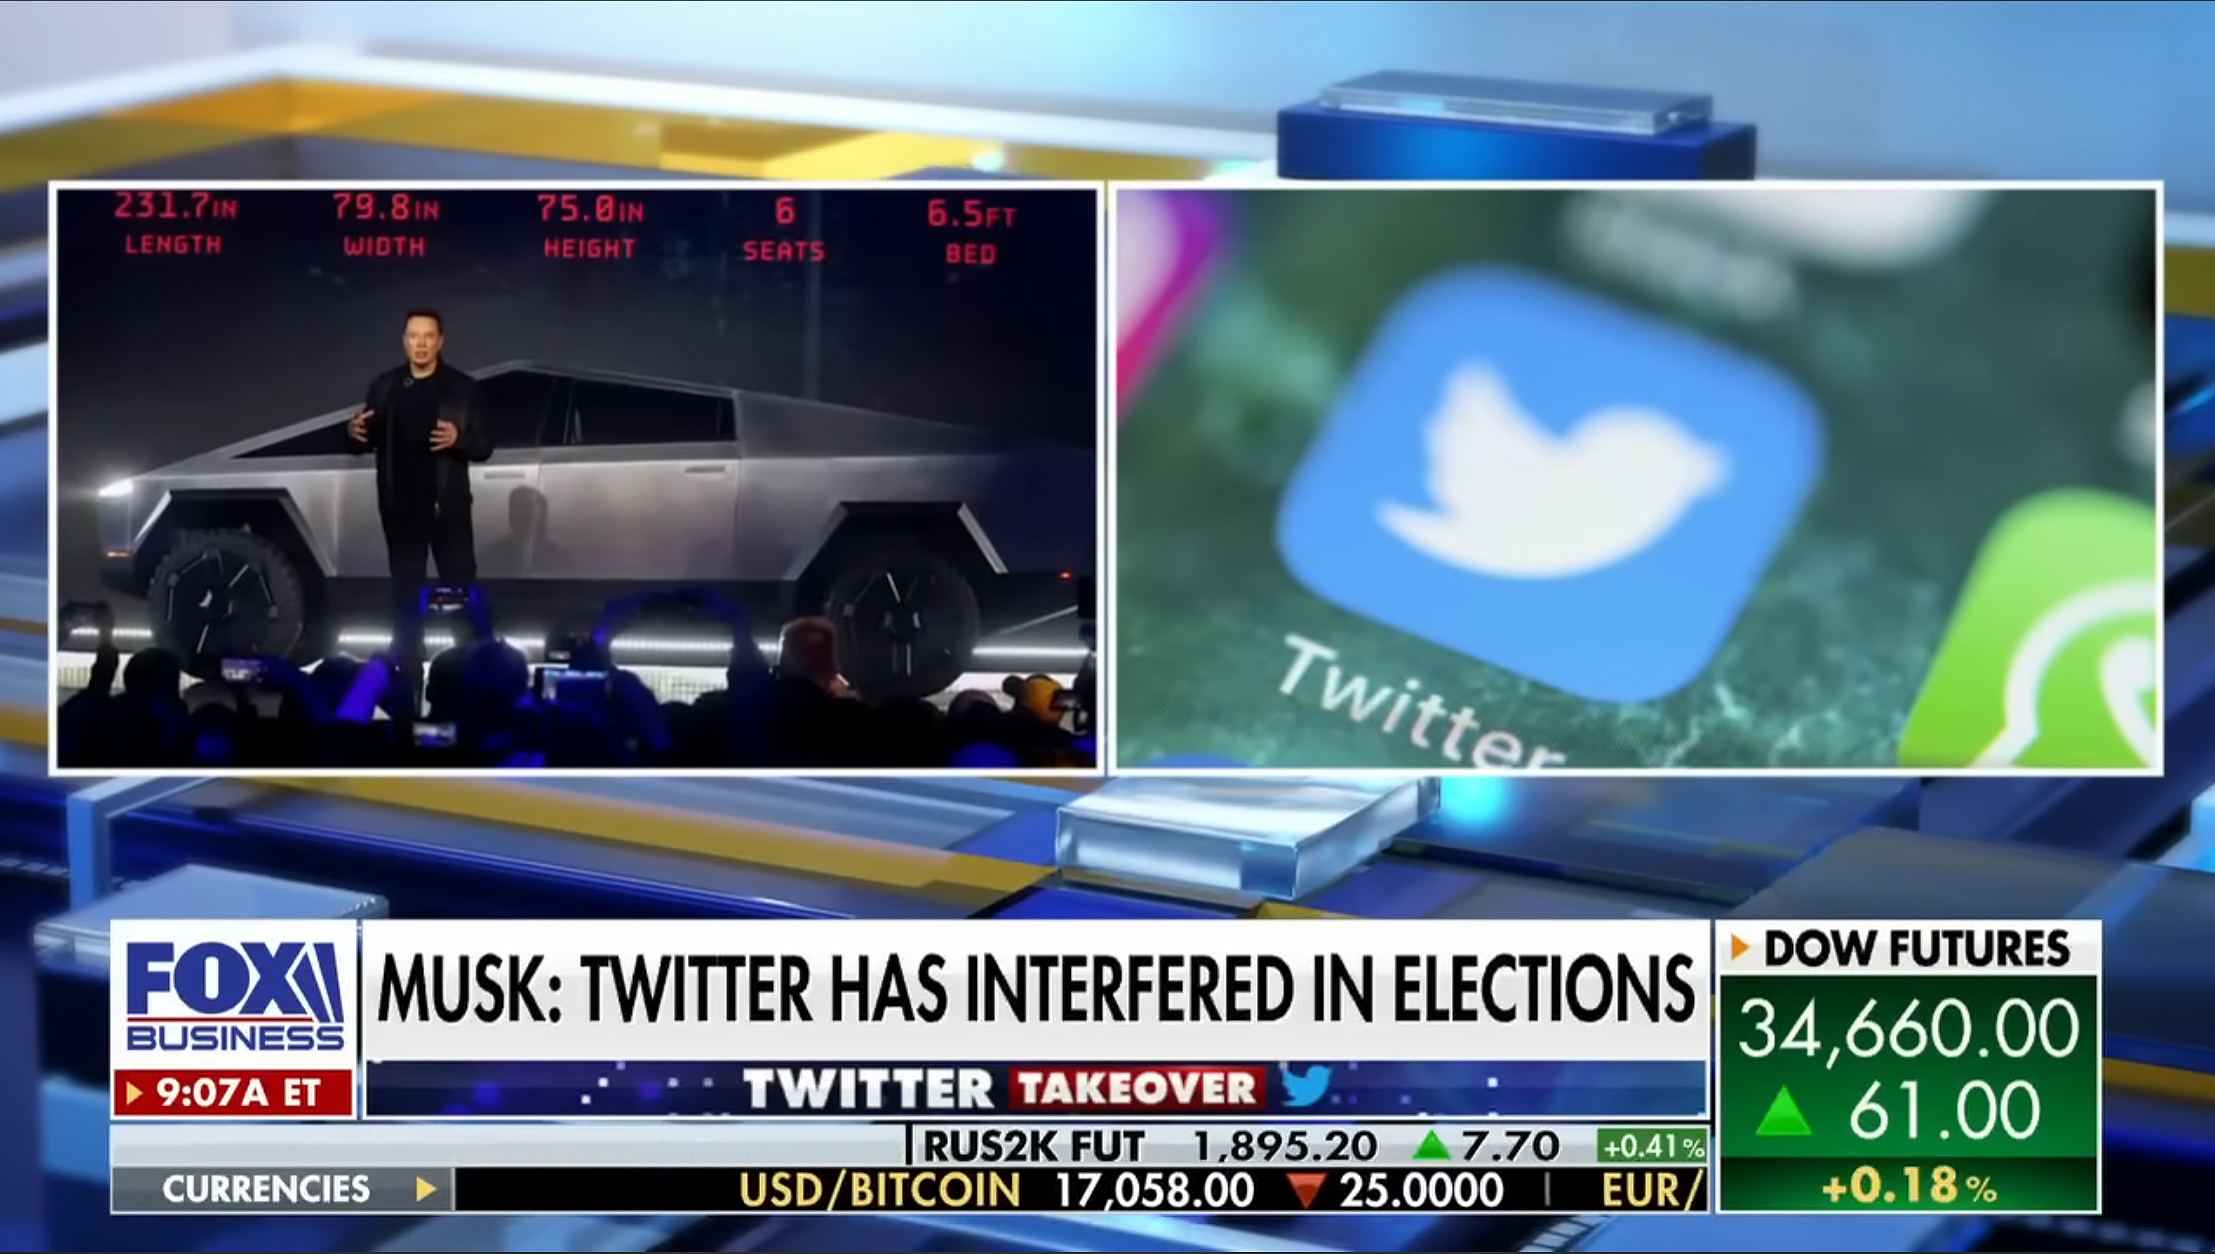 Fox News story about Elon Musk claiming Twitter rigged elections, via YouTube